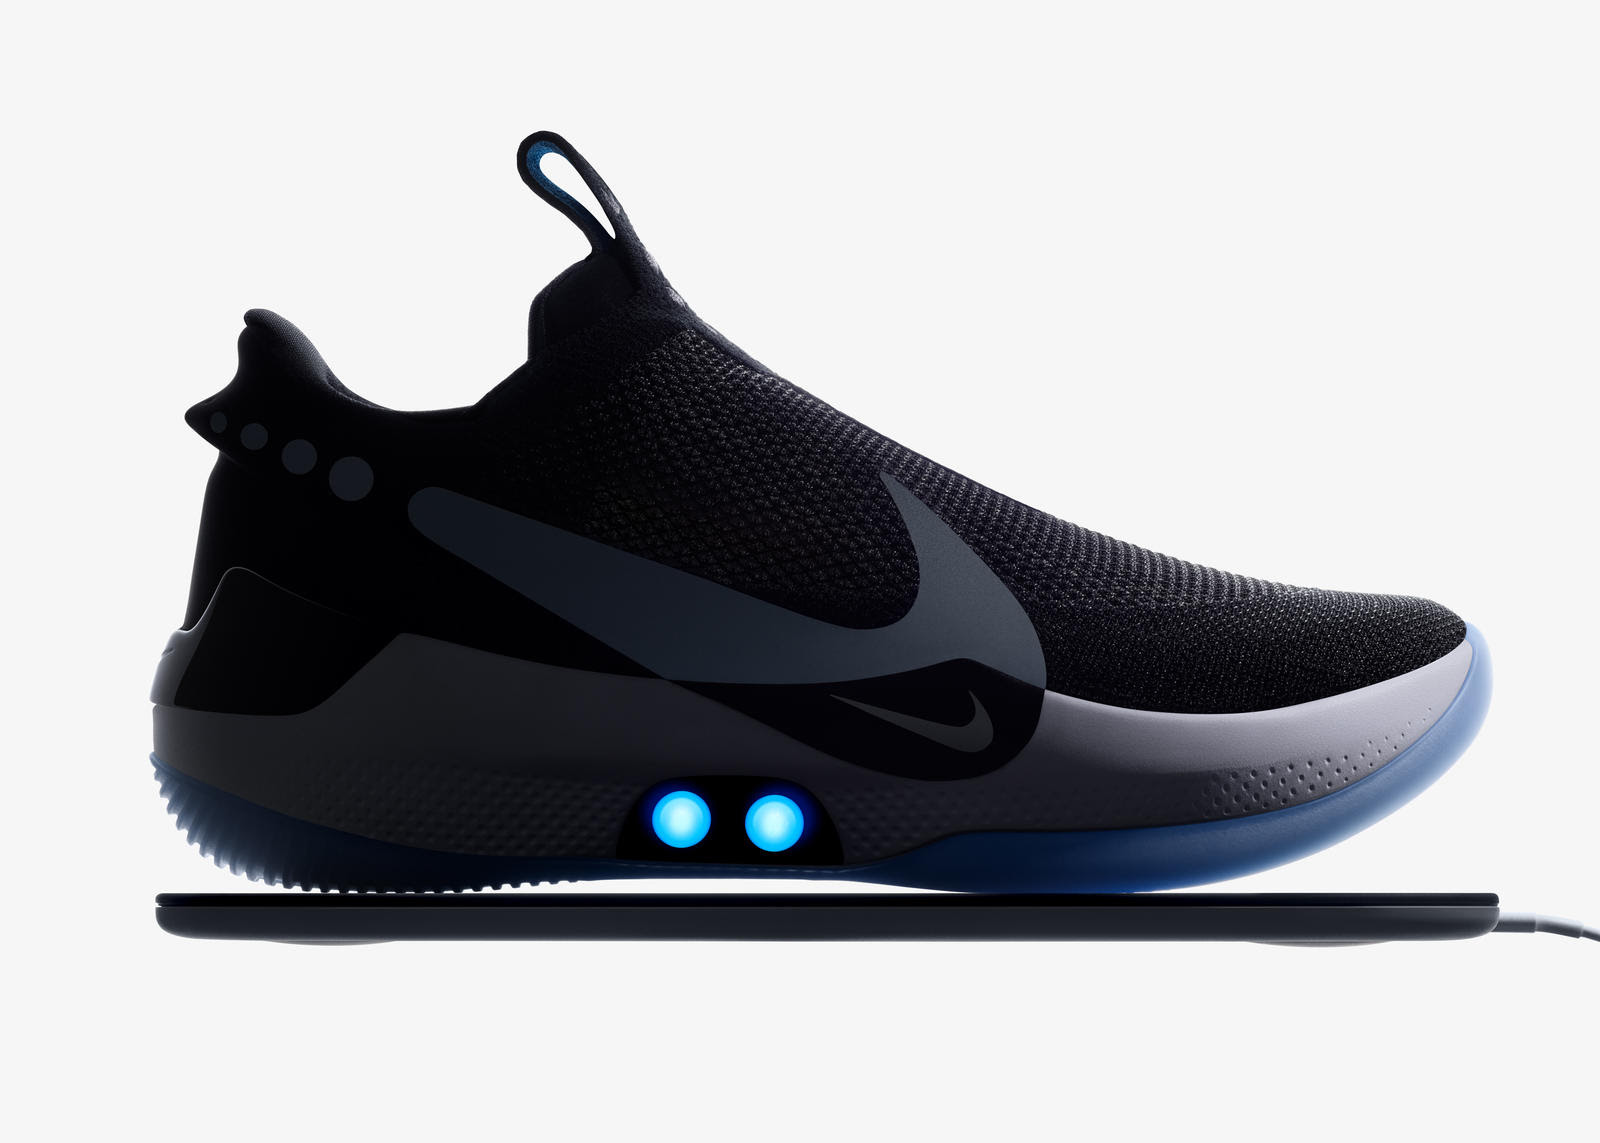 Nike Will Let People Design and Sell Sneakers for the Metaverse  WIRED